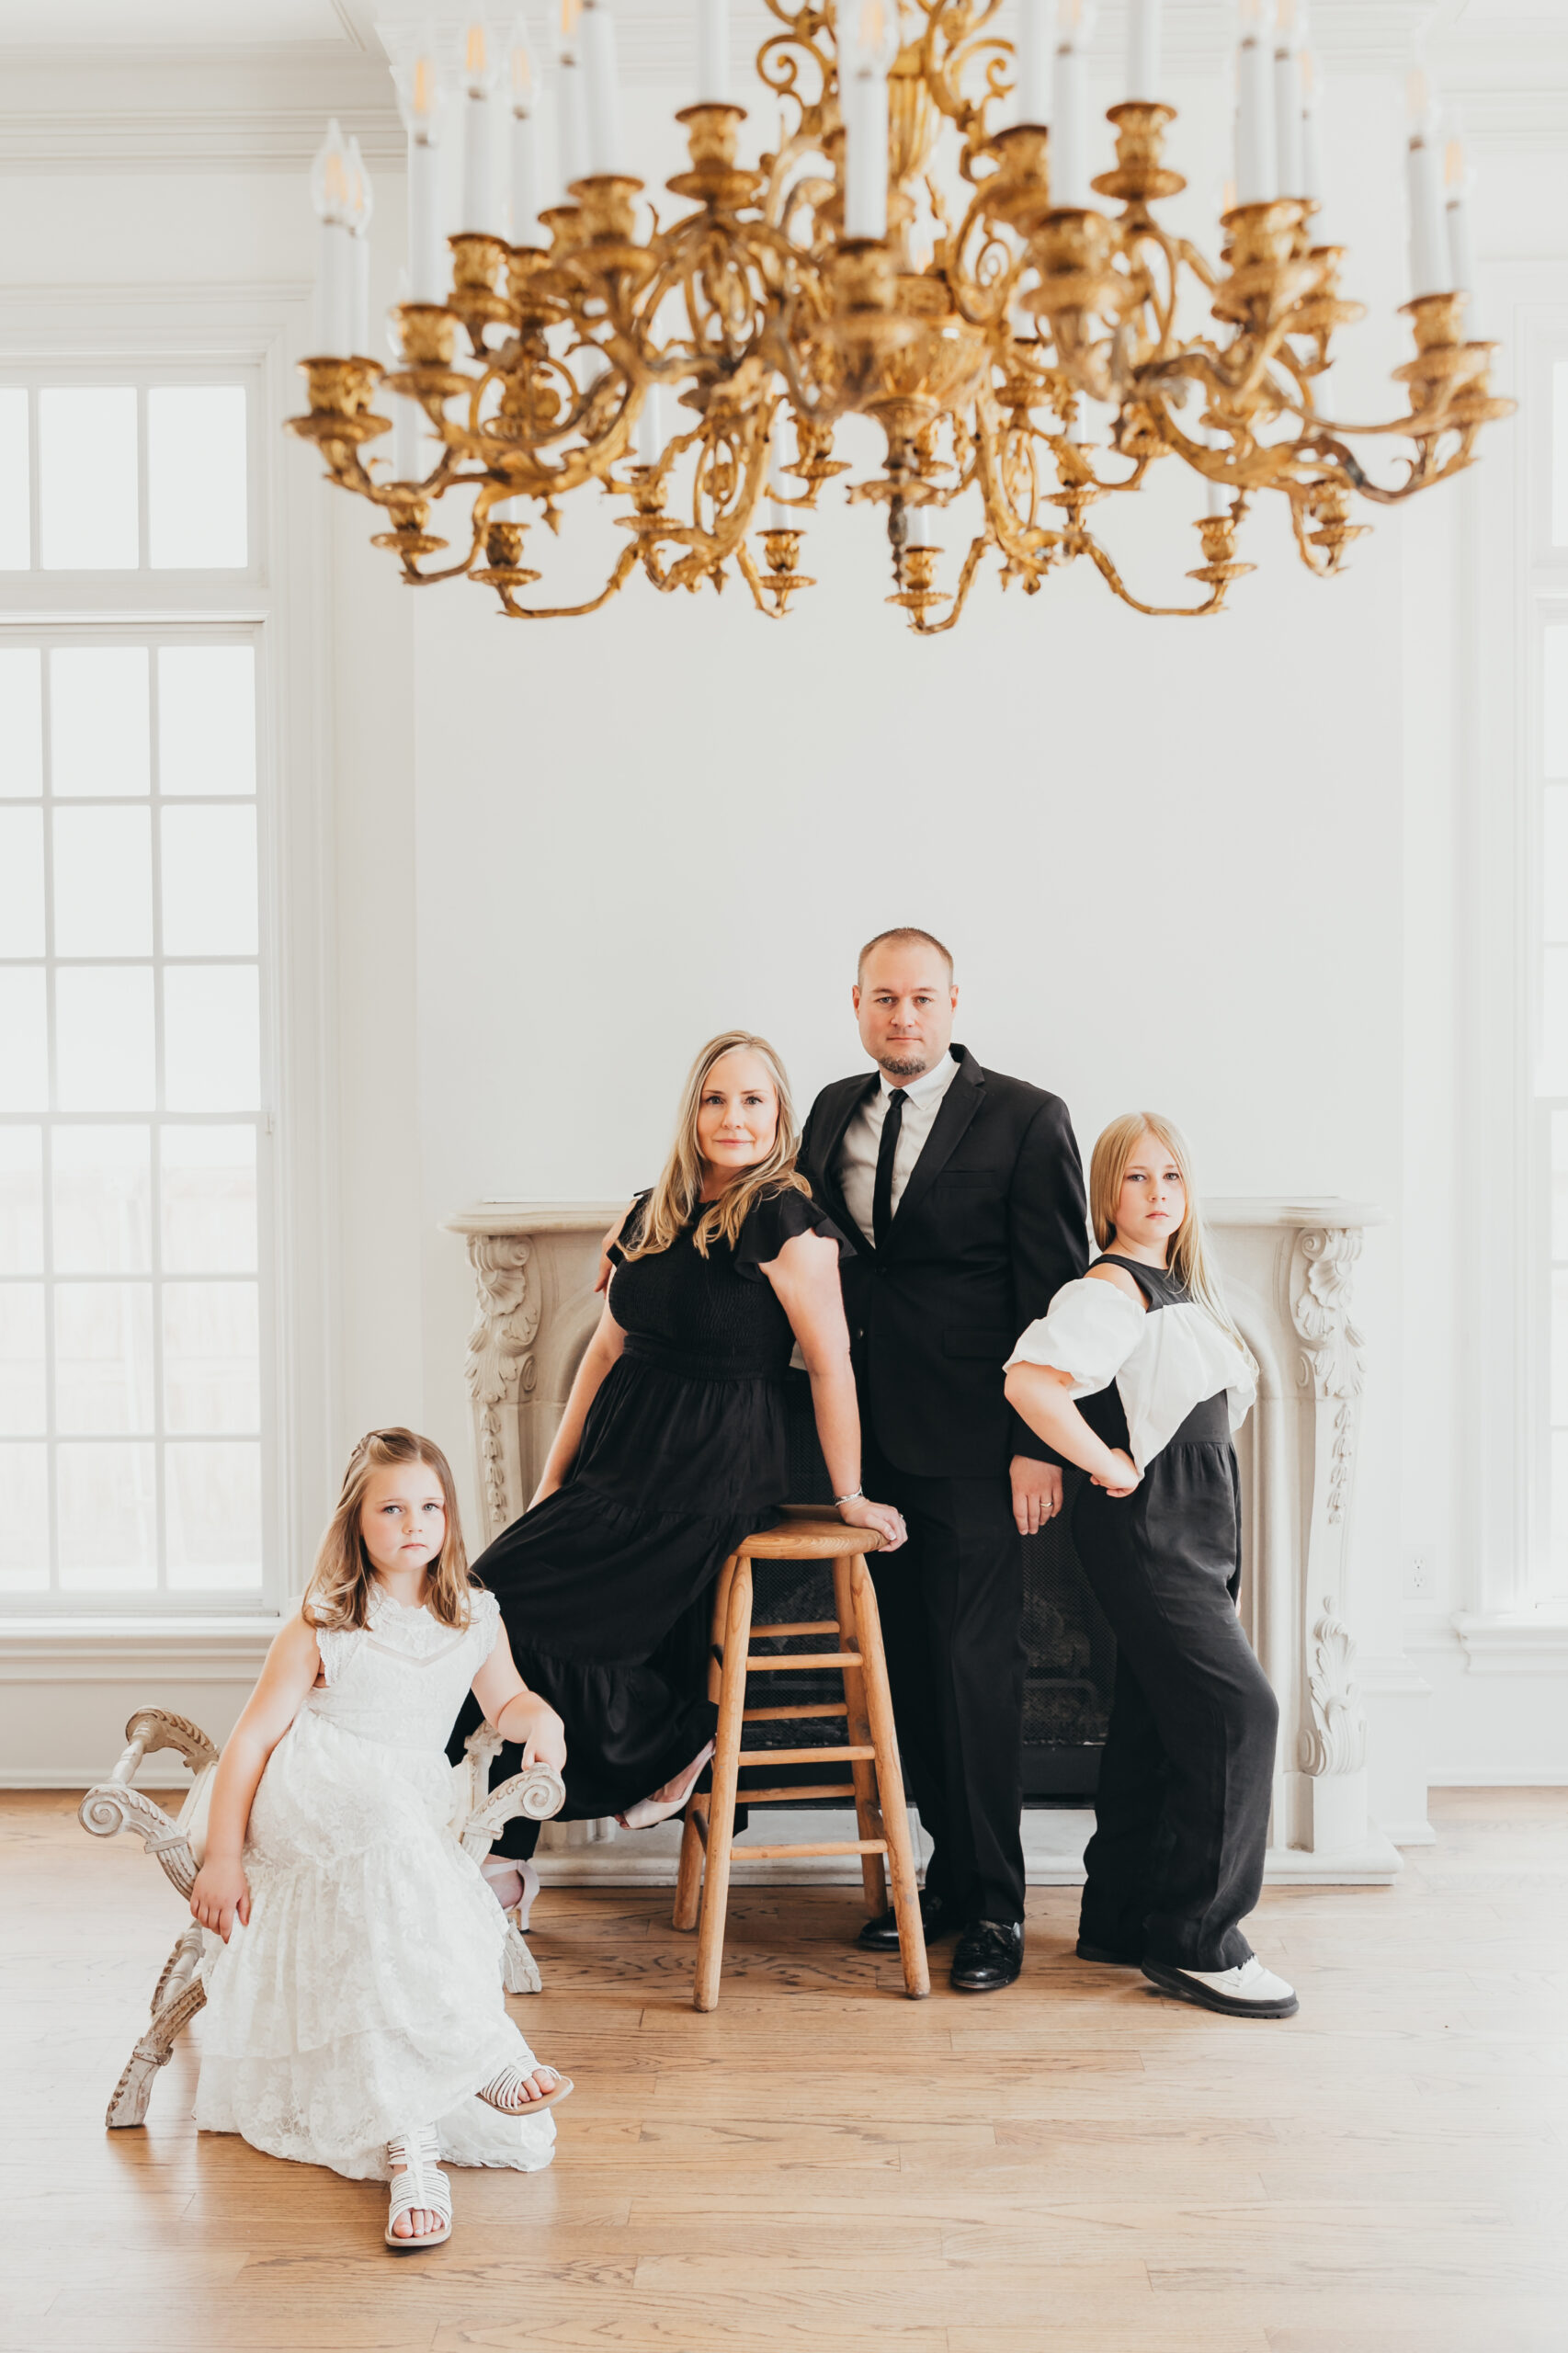 Creative Chateau is a great houston wedding venue, and excellent choice for all types of other sessions by Ally's Photography. Vogue inspired family portrait by Allyson Blankenburg